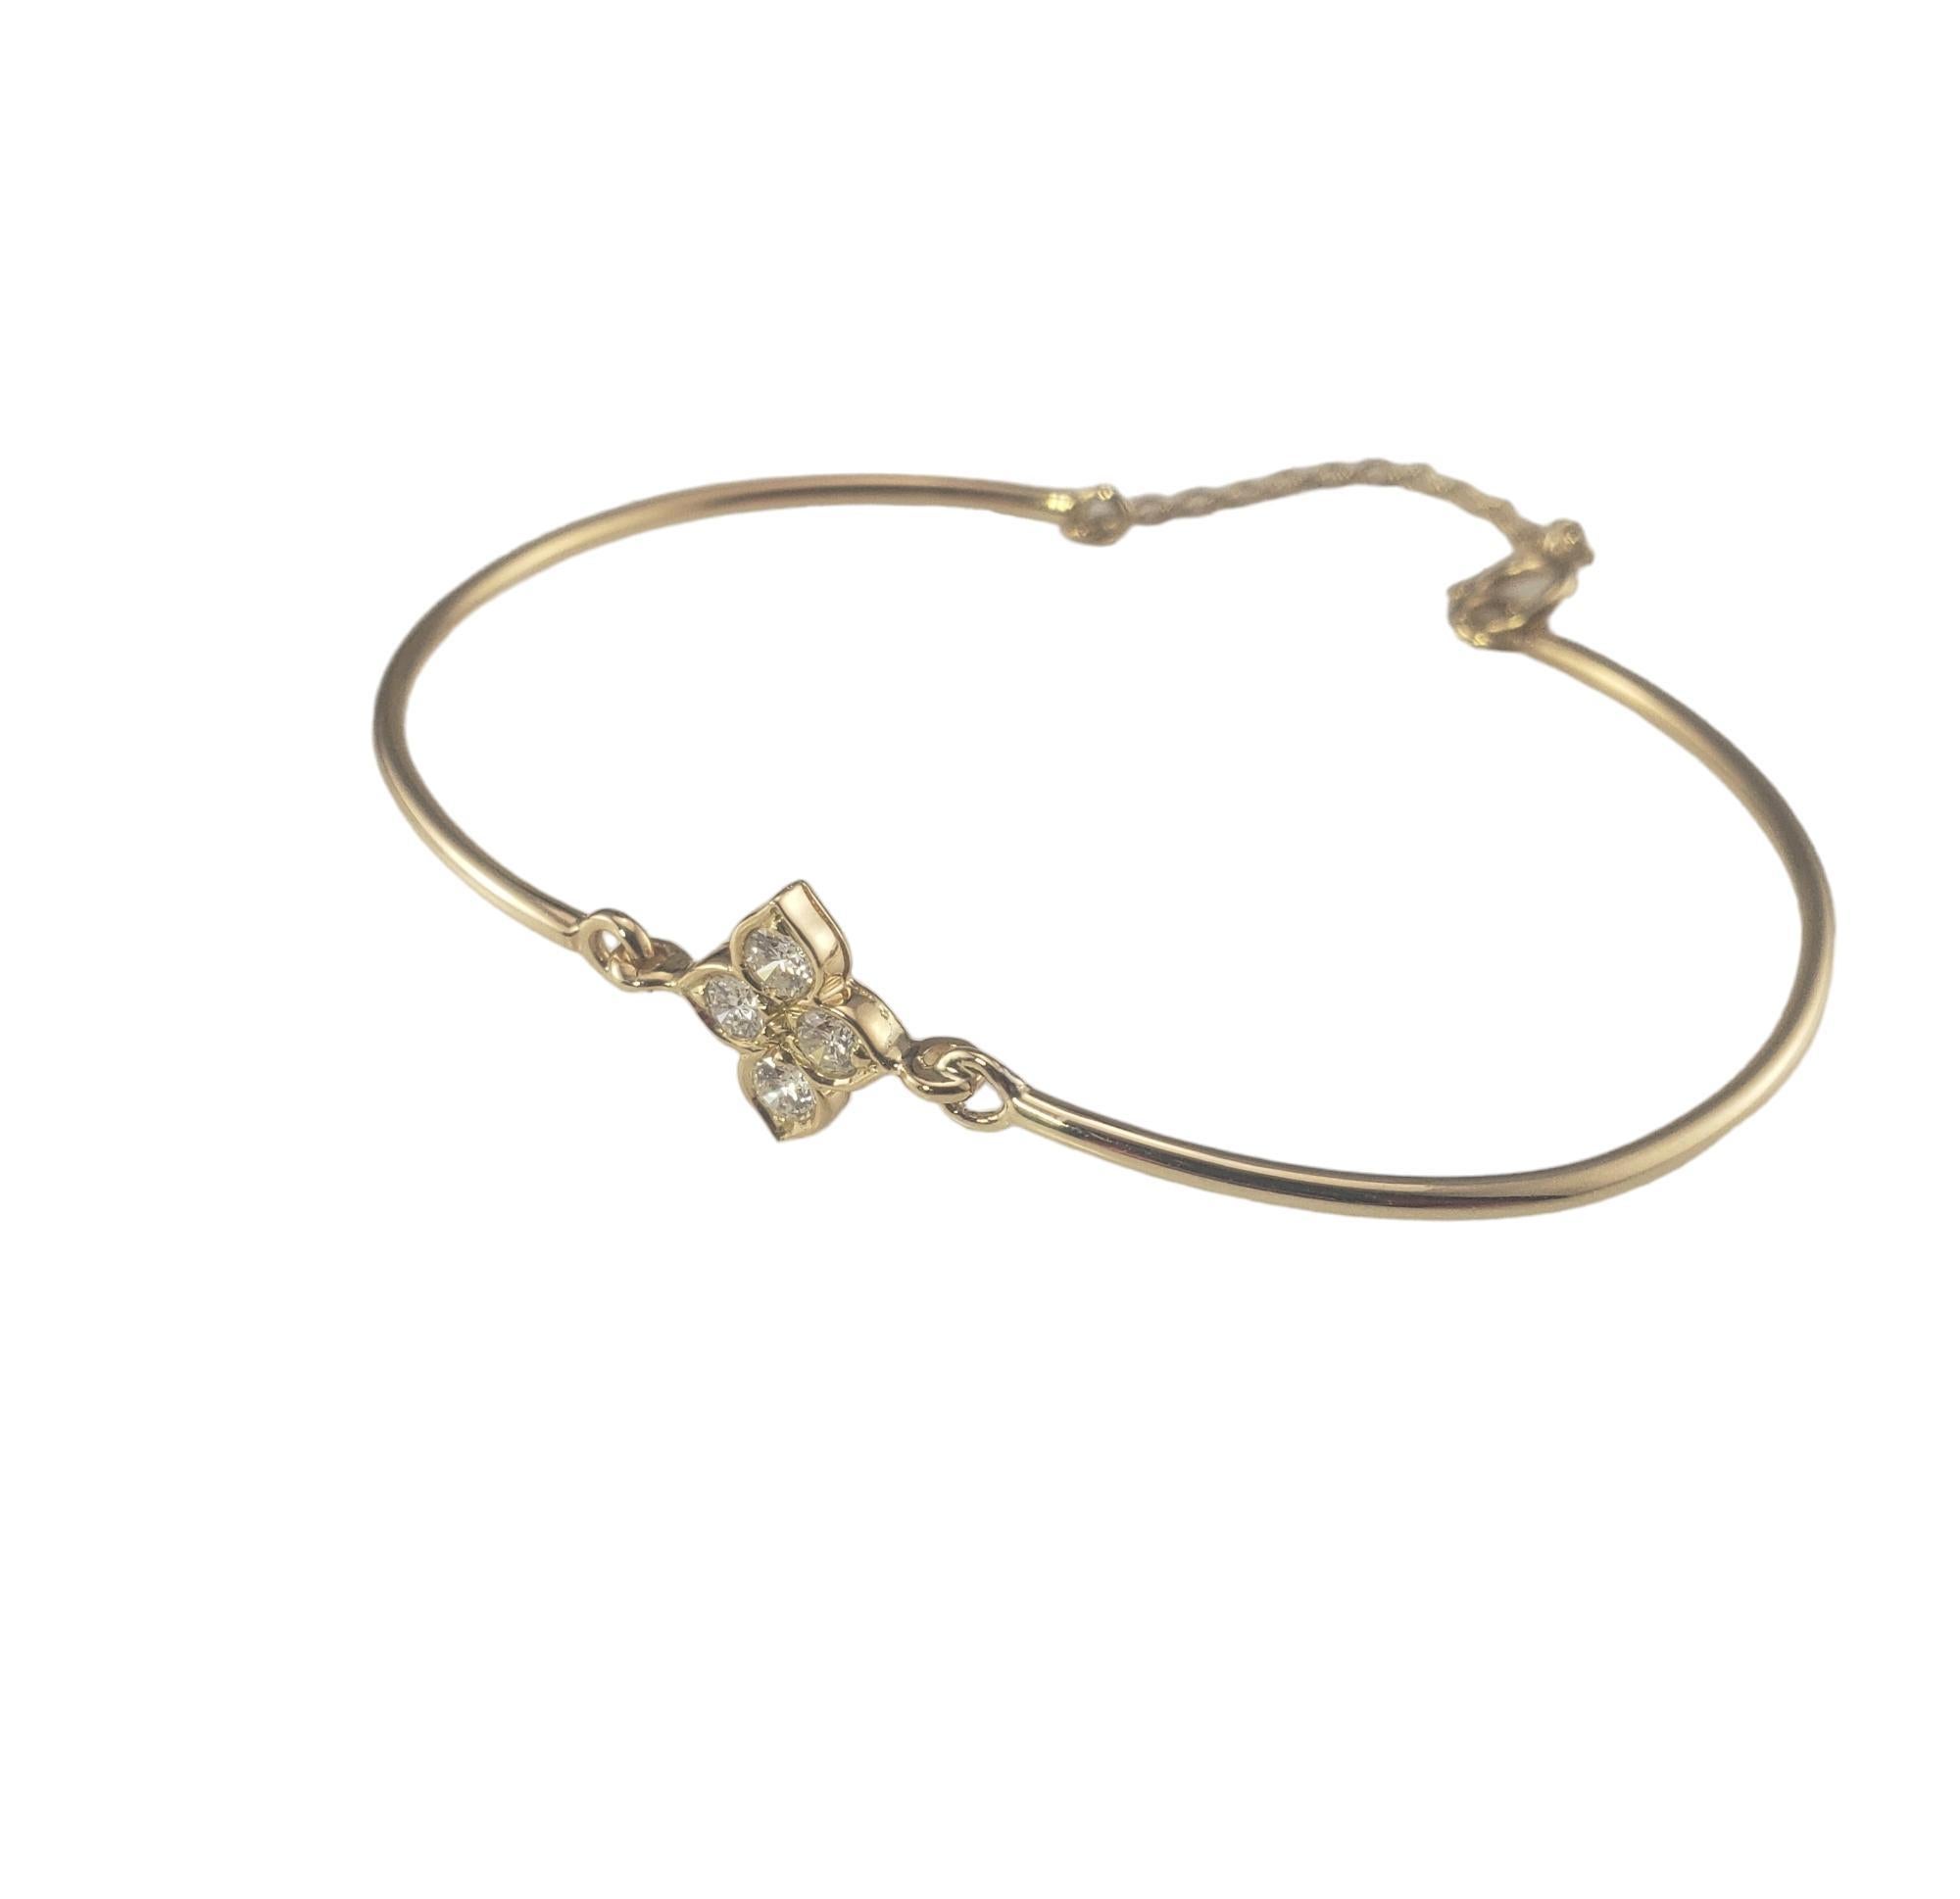 Cartier 18K Yellow Gold and Diamond Quatrefoil Bracelet

The Quatrefoil bracelet by Cartier is features four round brilliant cut diamonds set in beautifully detailed 18K yellow gold. Chain spring closure.*  

Width: .25